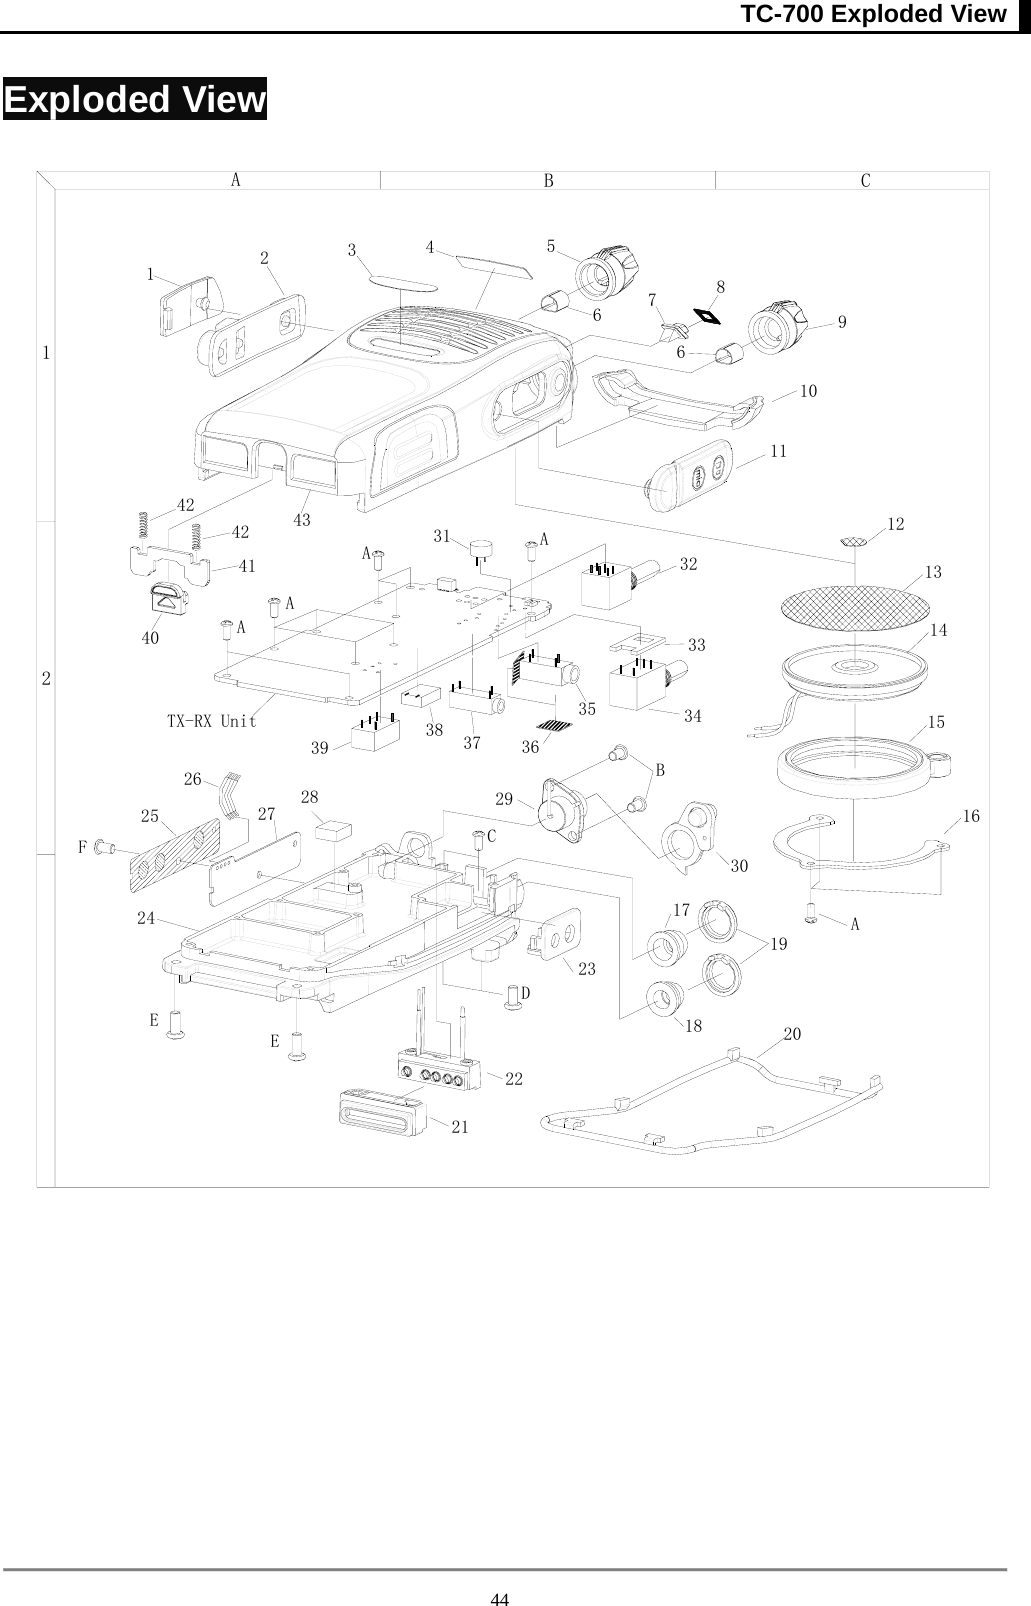 TC-700 Exploded View  44Exploded View 16910151920212228 293041A4242 432BA1C1435 3433323111A2324123457612131718B40393826EDAAAFCE6TX-RX Unit2737 36258     